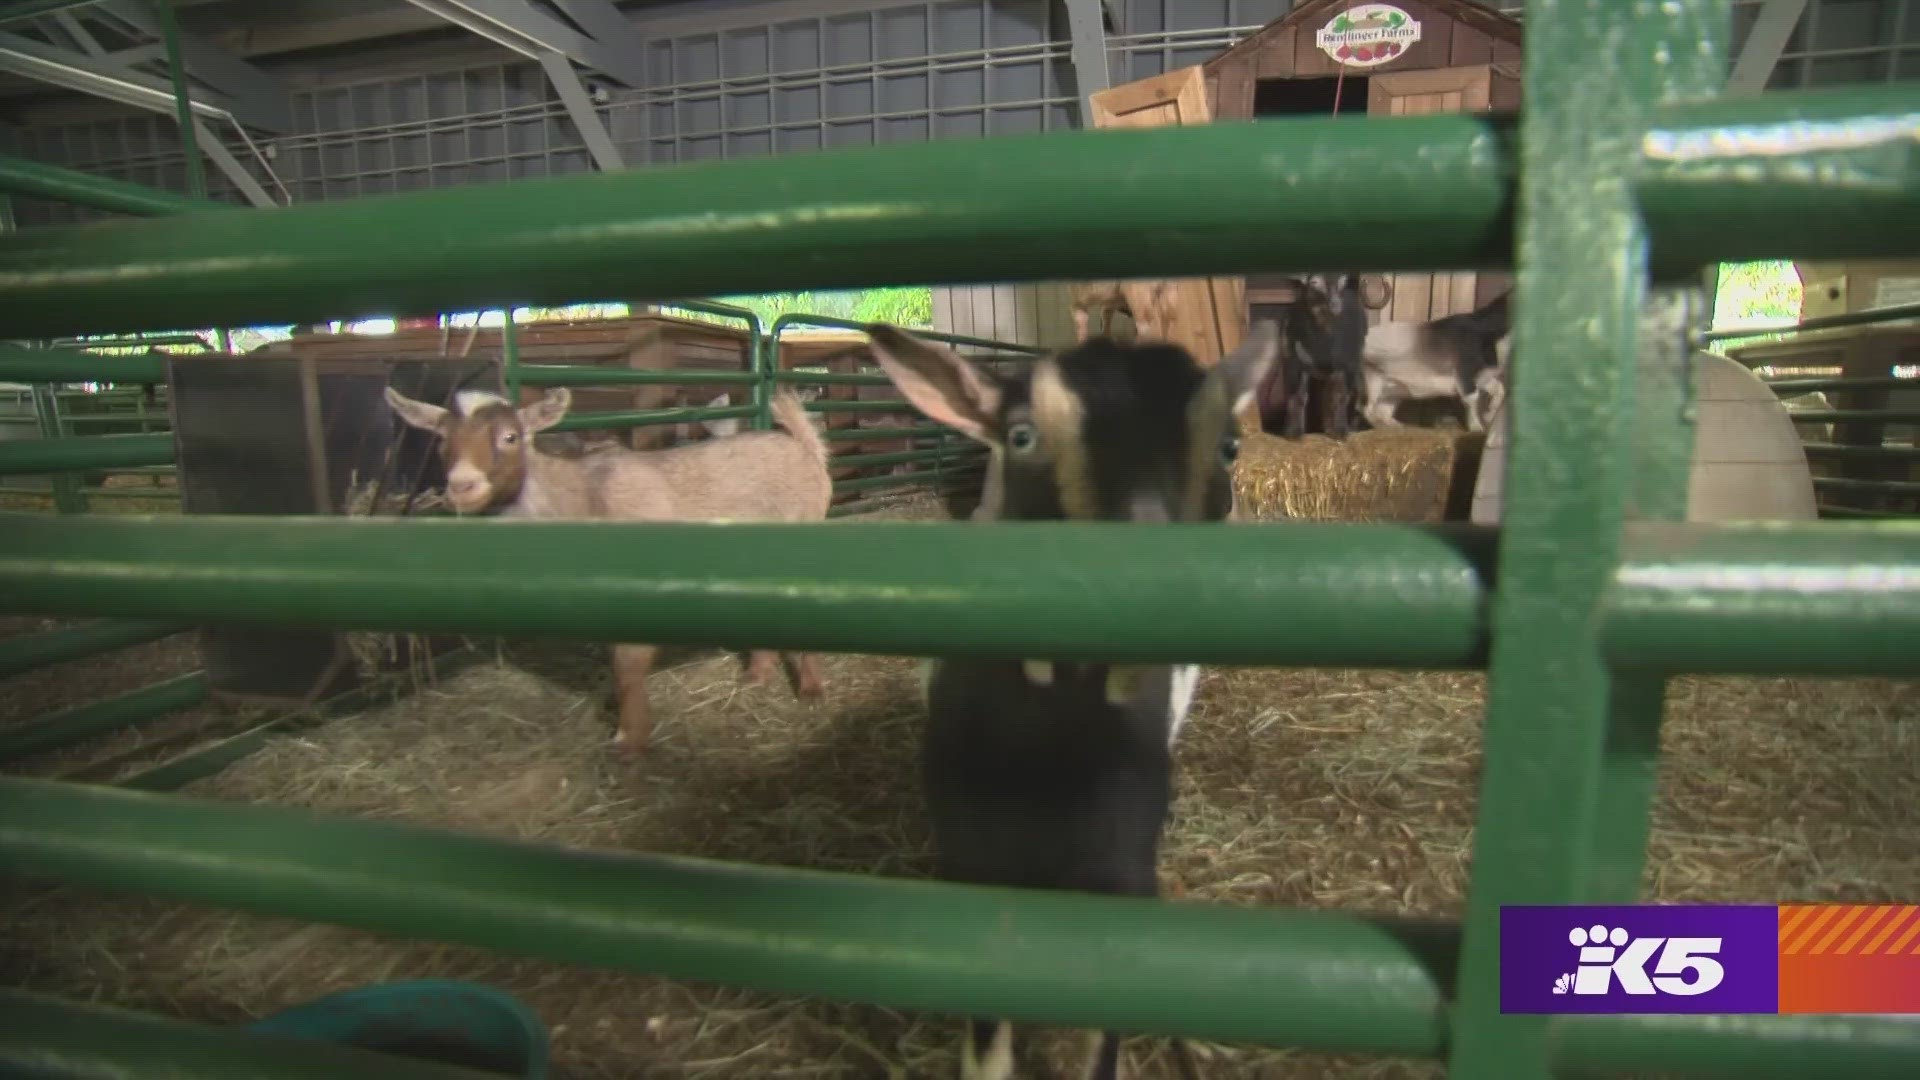 There's a reason Remlinger Farms is the winner of Best Family Farm -- it's been a destination for families in Carnation since 1965. #k5evening